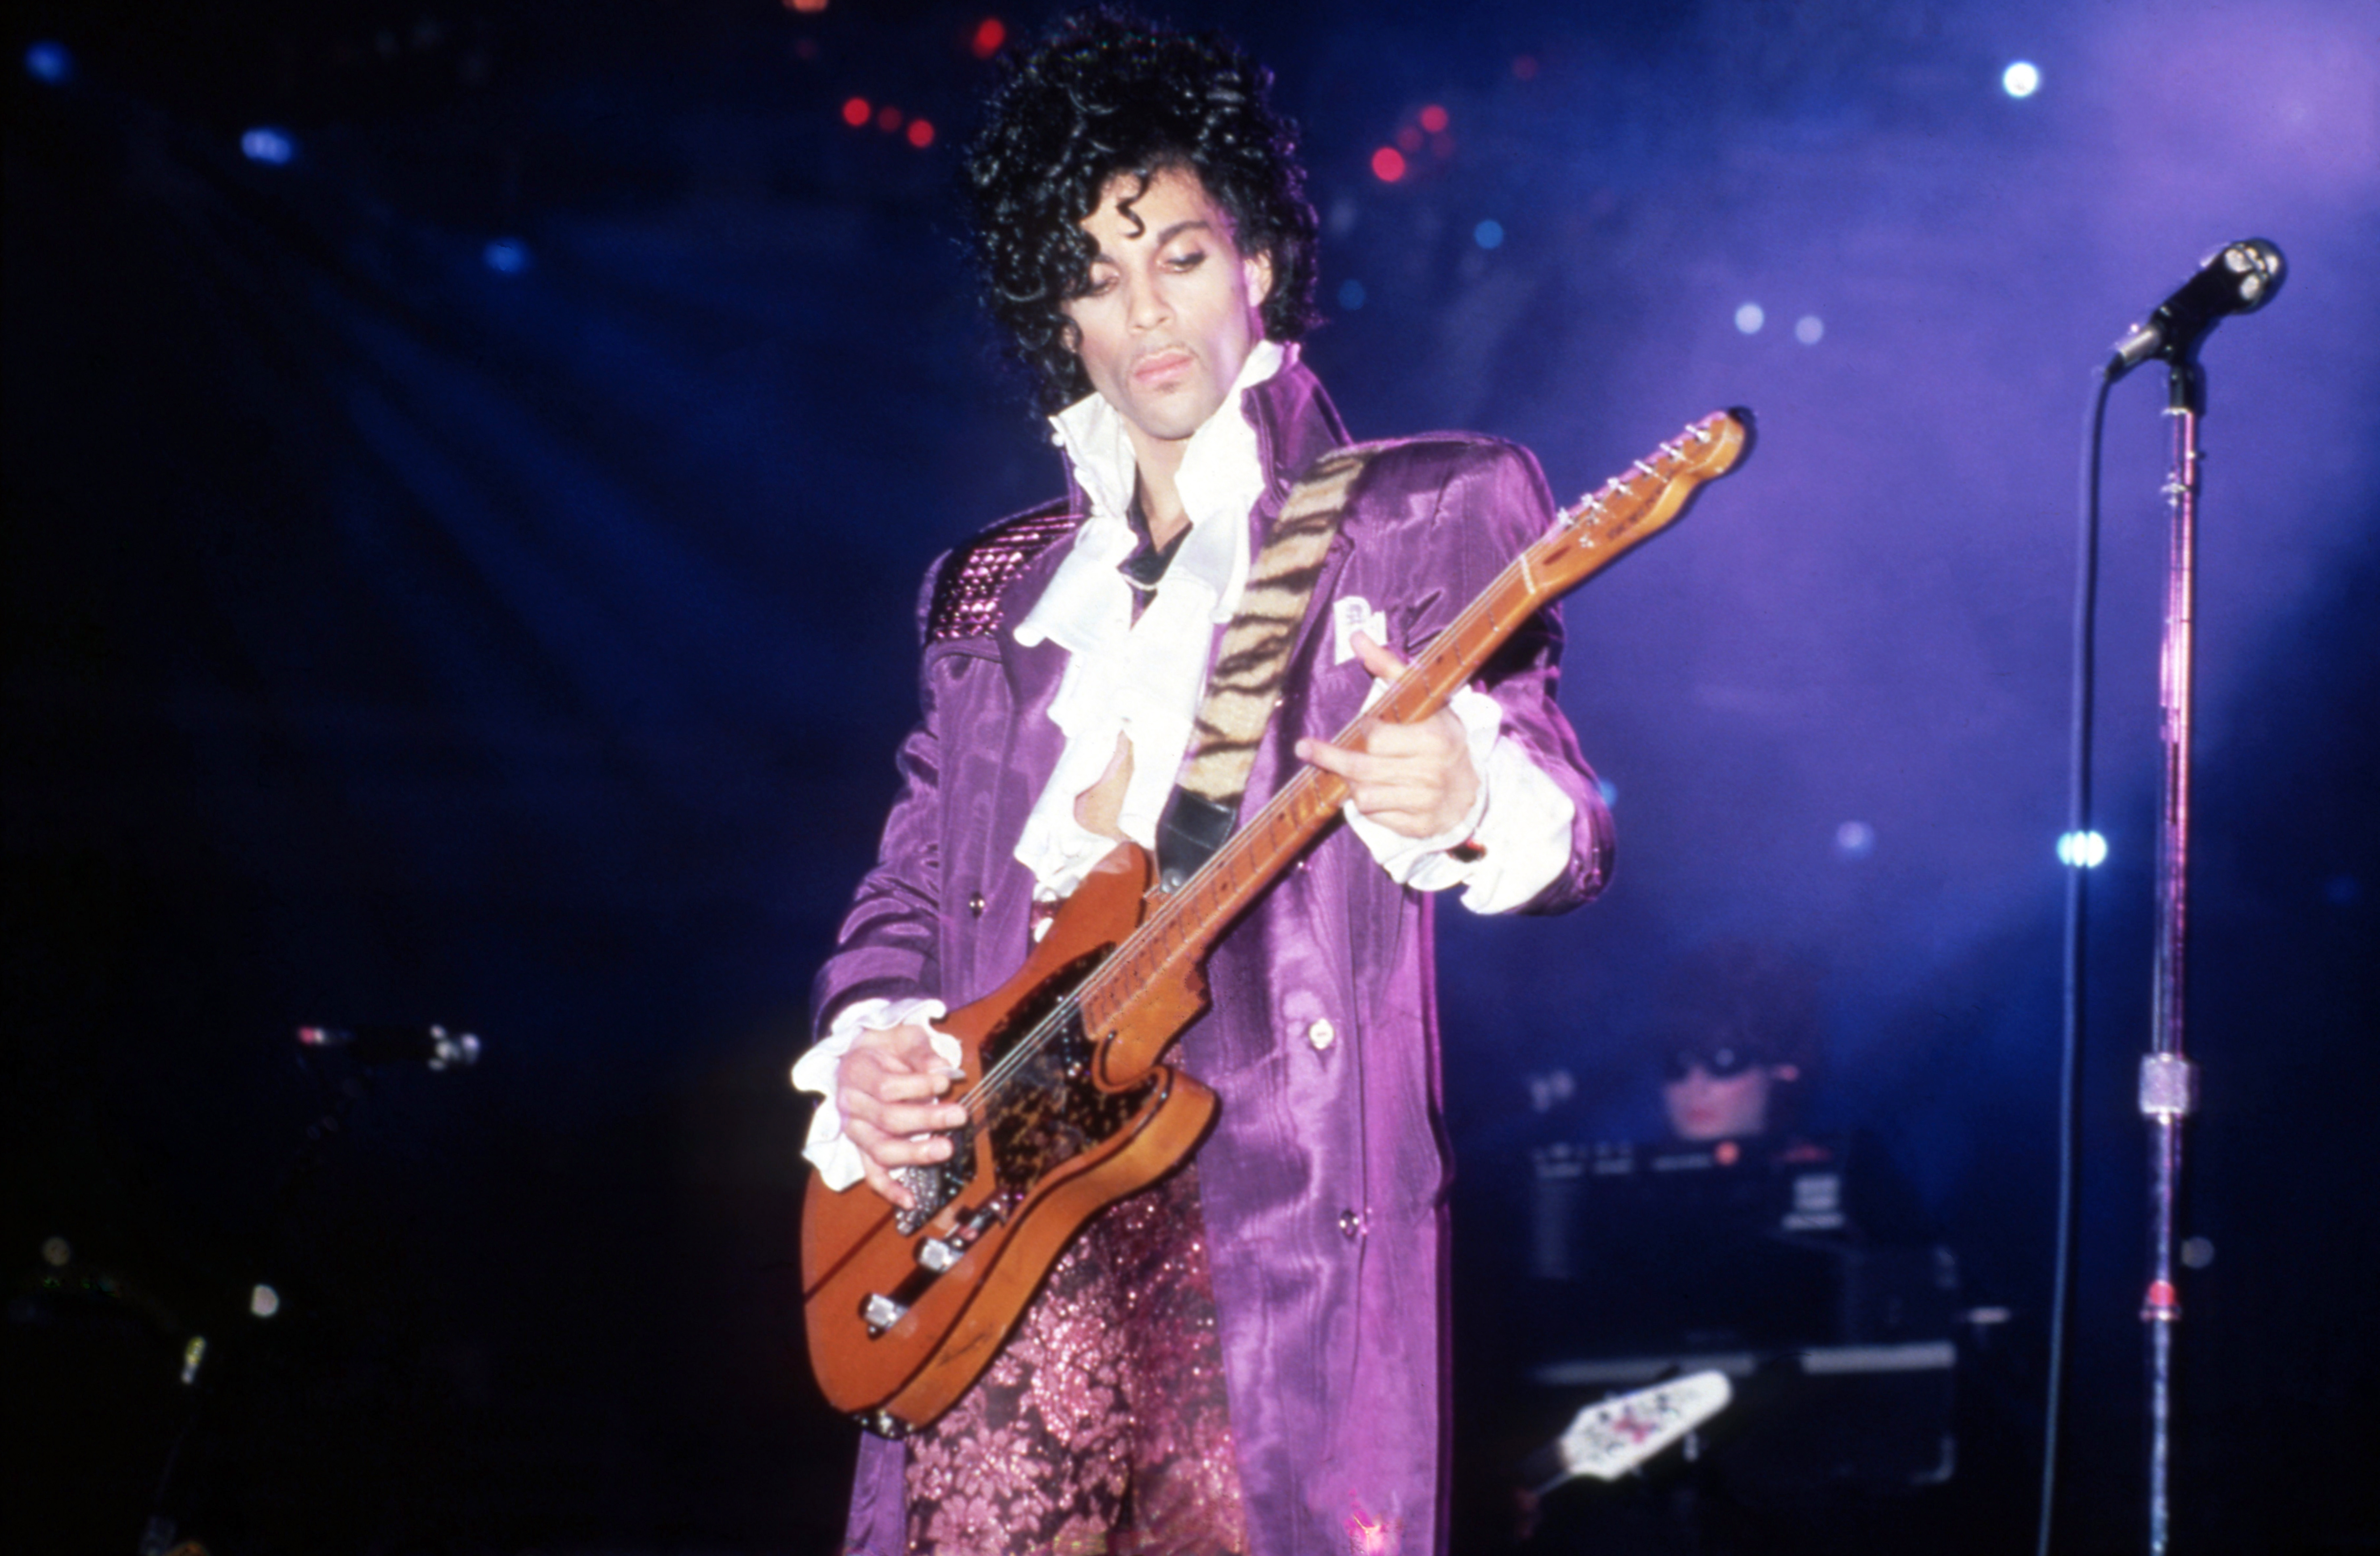 Prince performing during the "Purple Rain" tour in November 4,1984 in Detroit, Michigan | Source: Getty Images